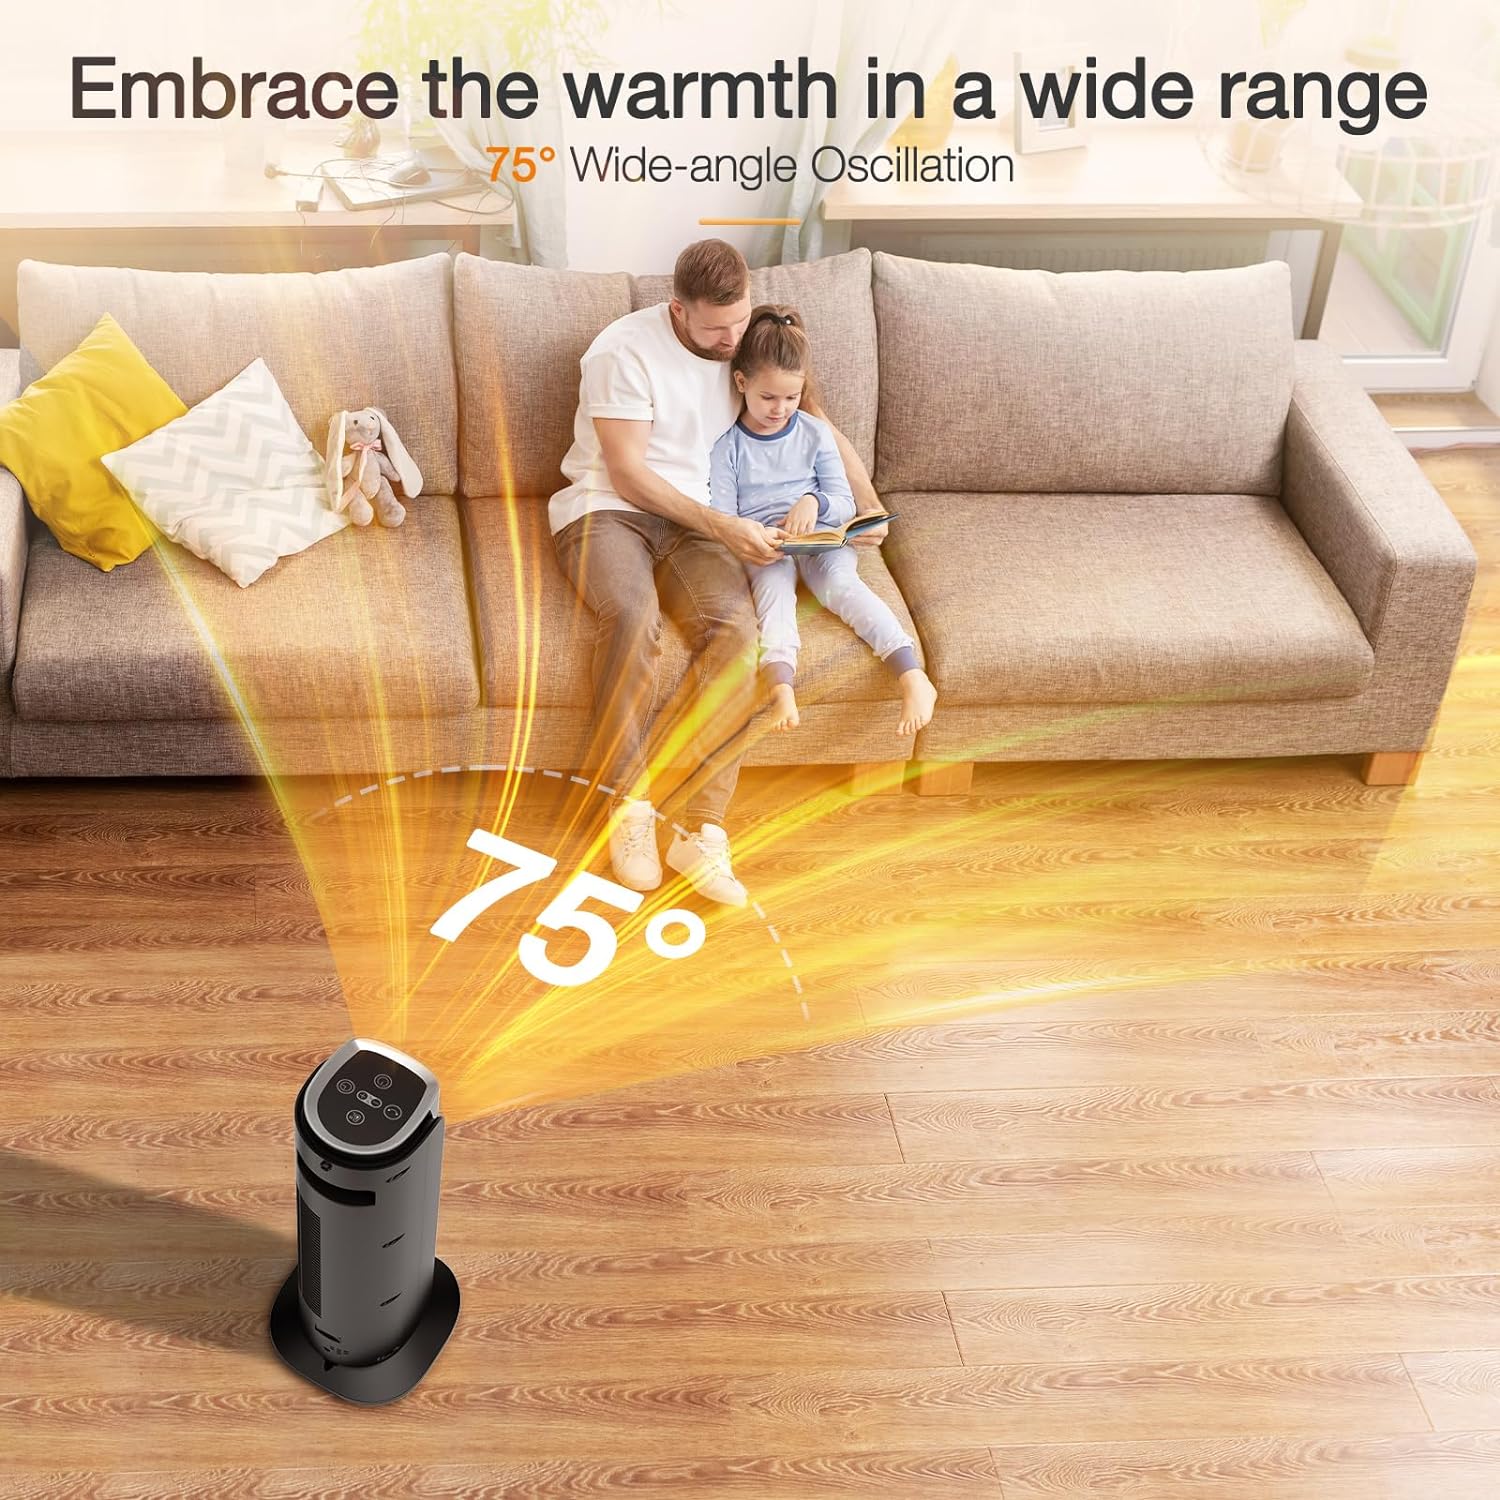 Space Heater,VCK 1500W 24 Portable Electric Heaters for Indoor Use,75° Oscillation,3 Modes,8H Timer, Quite PTC Ceramic Heating with Thermostat,Safety Protection,Remote for Office,Home Bedroom